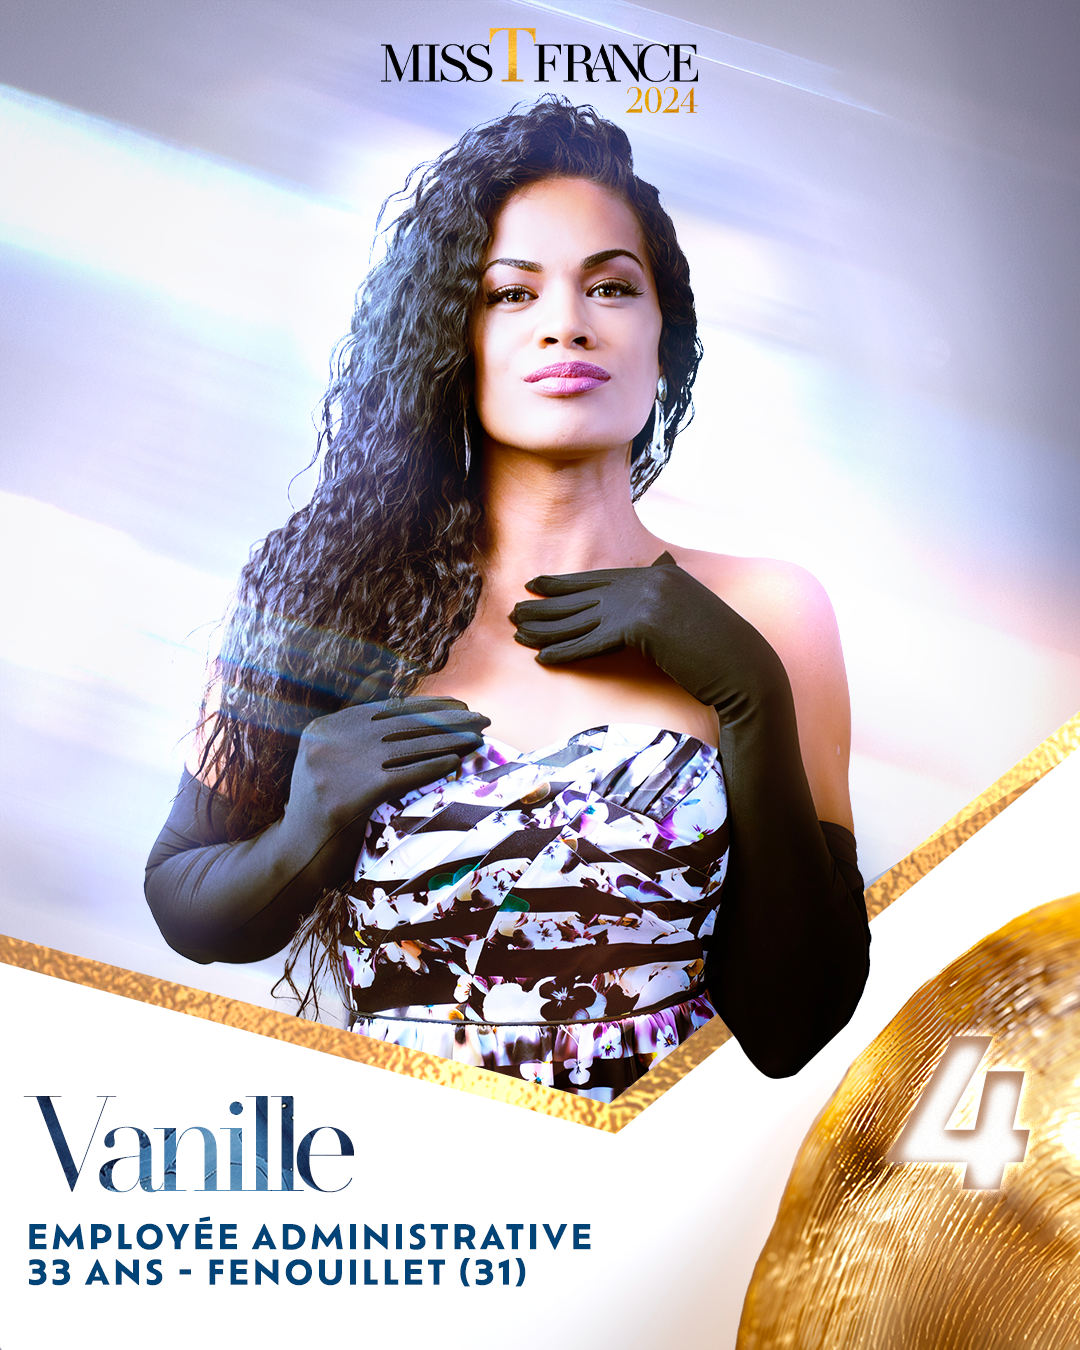 Vanille - Candidate n°4